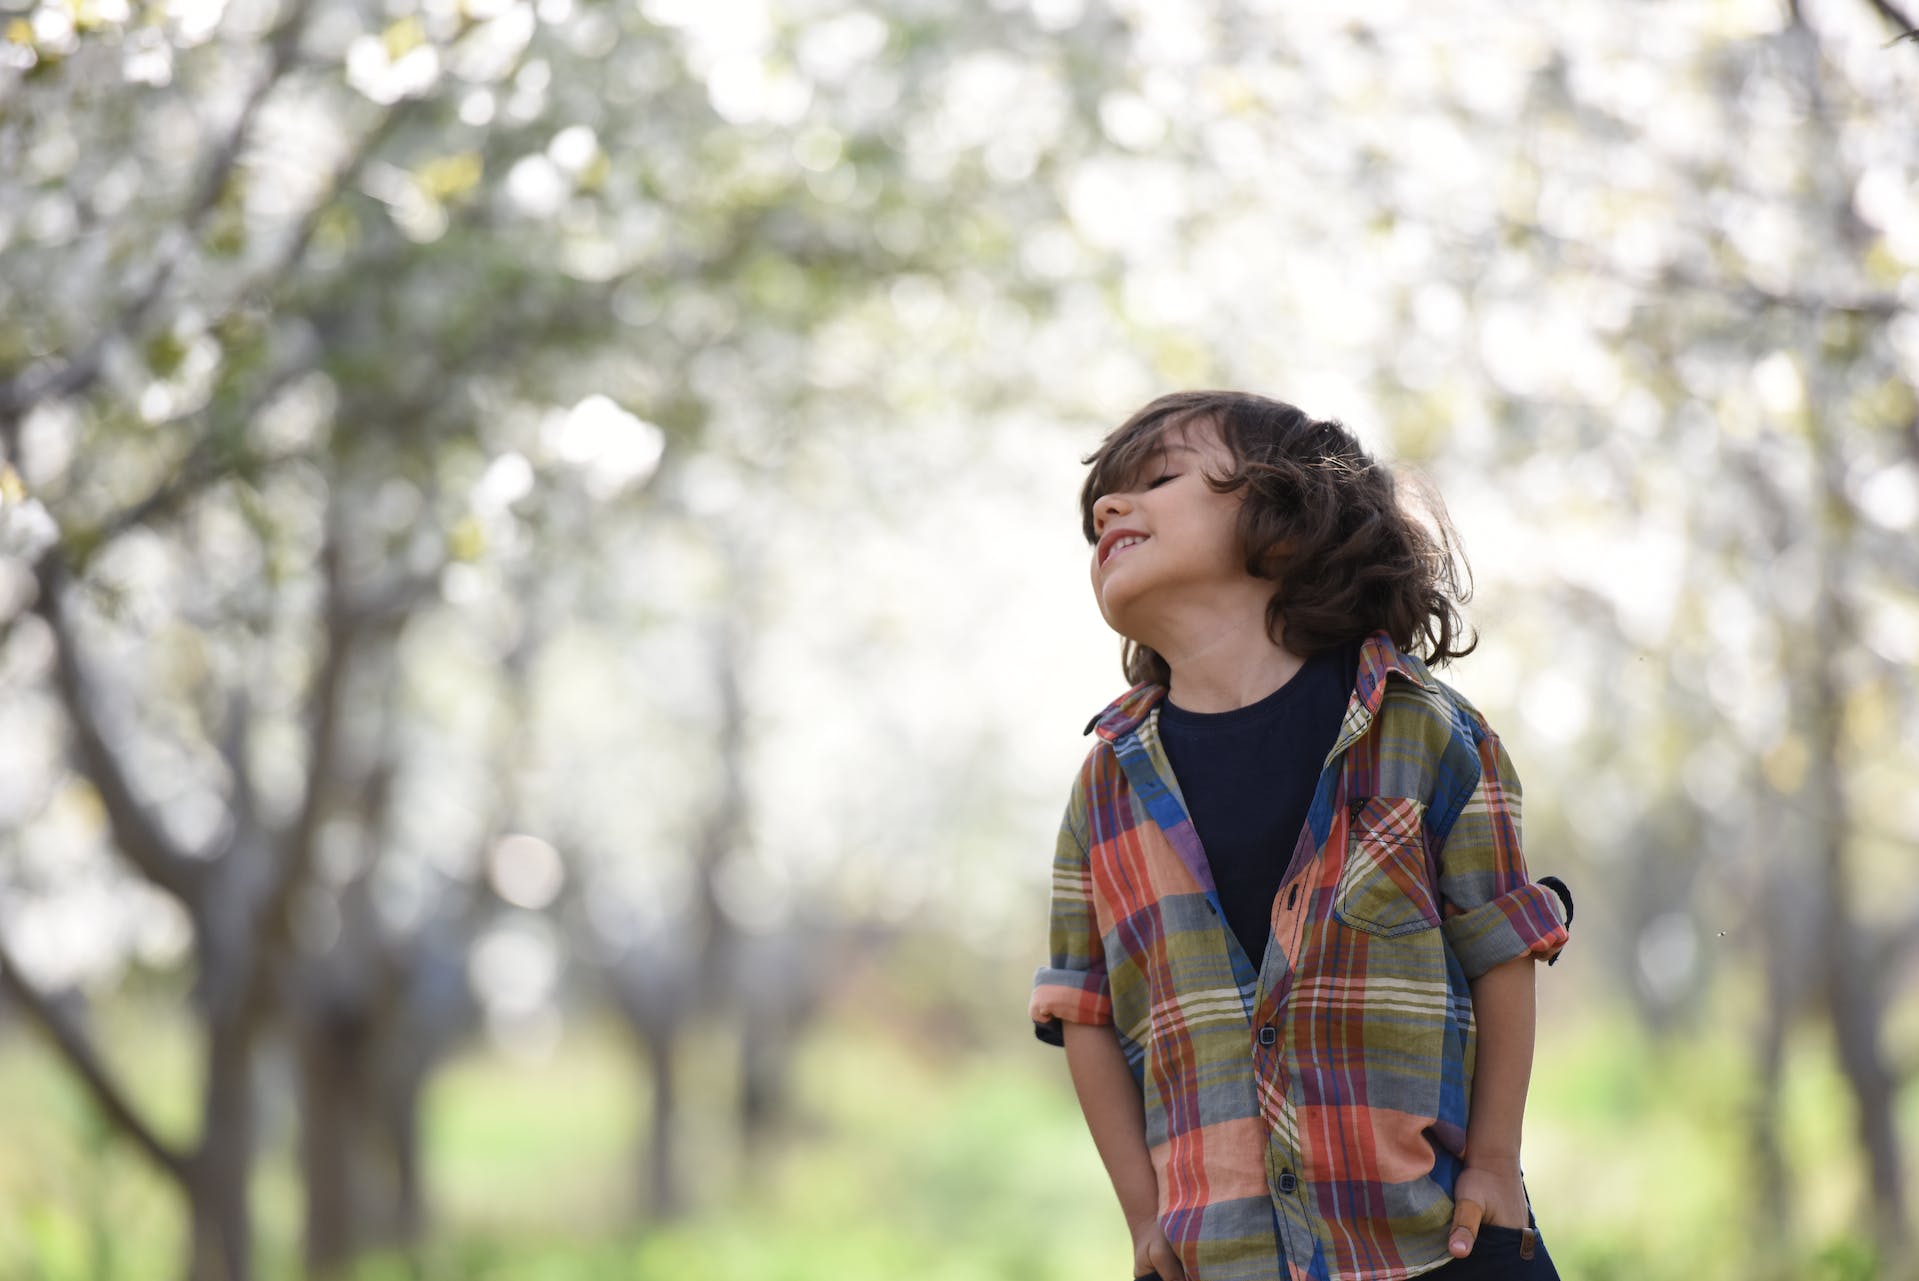 A child standing outdoors | Source: Pexels